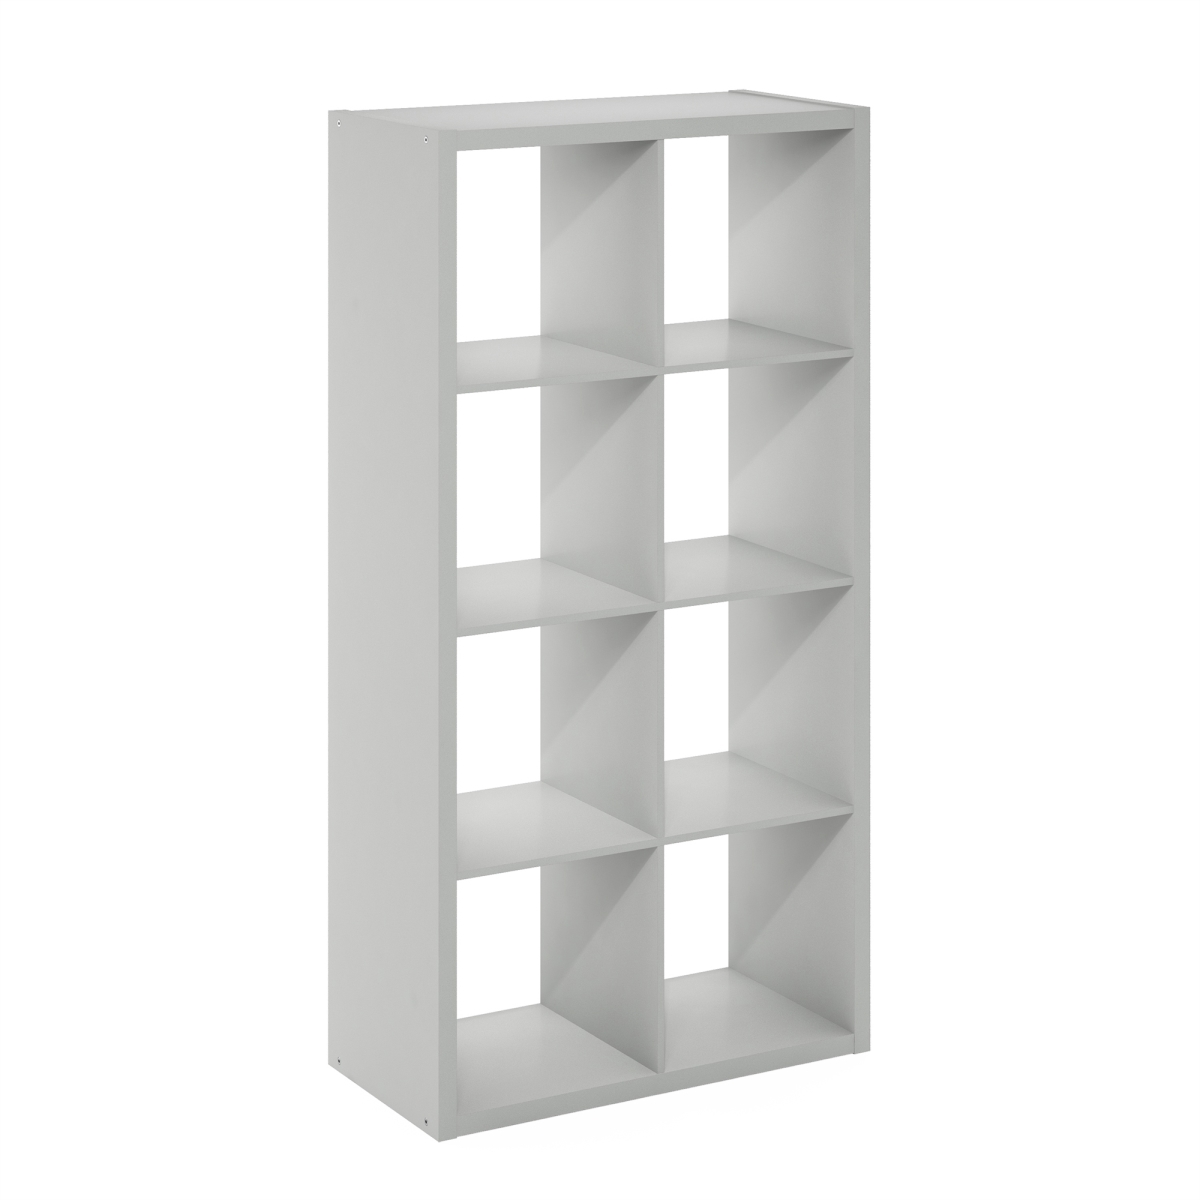 Picture of Furinno LU22006LG Cubicle Open Back Decorative Cube Storage Organizer - 8-Cube, Light Grey